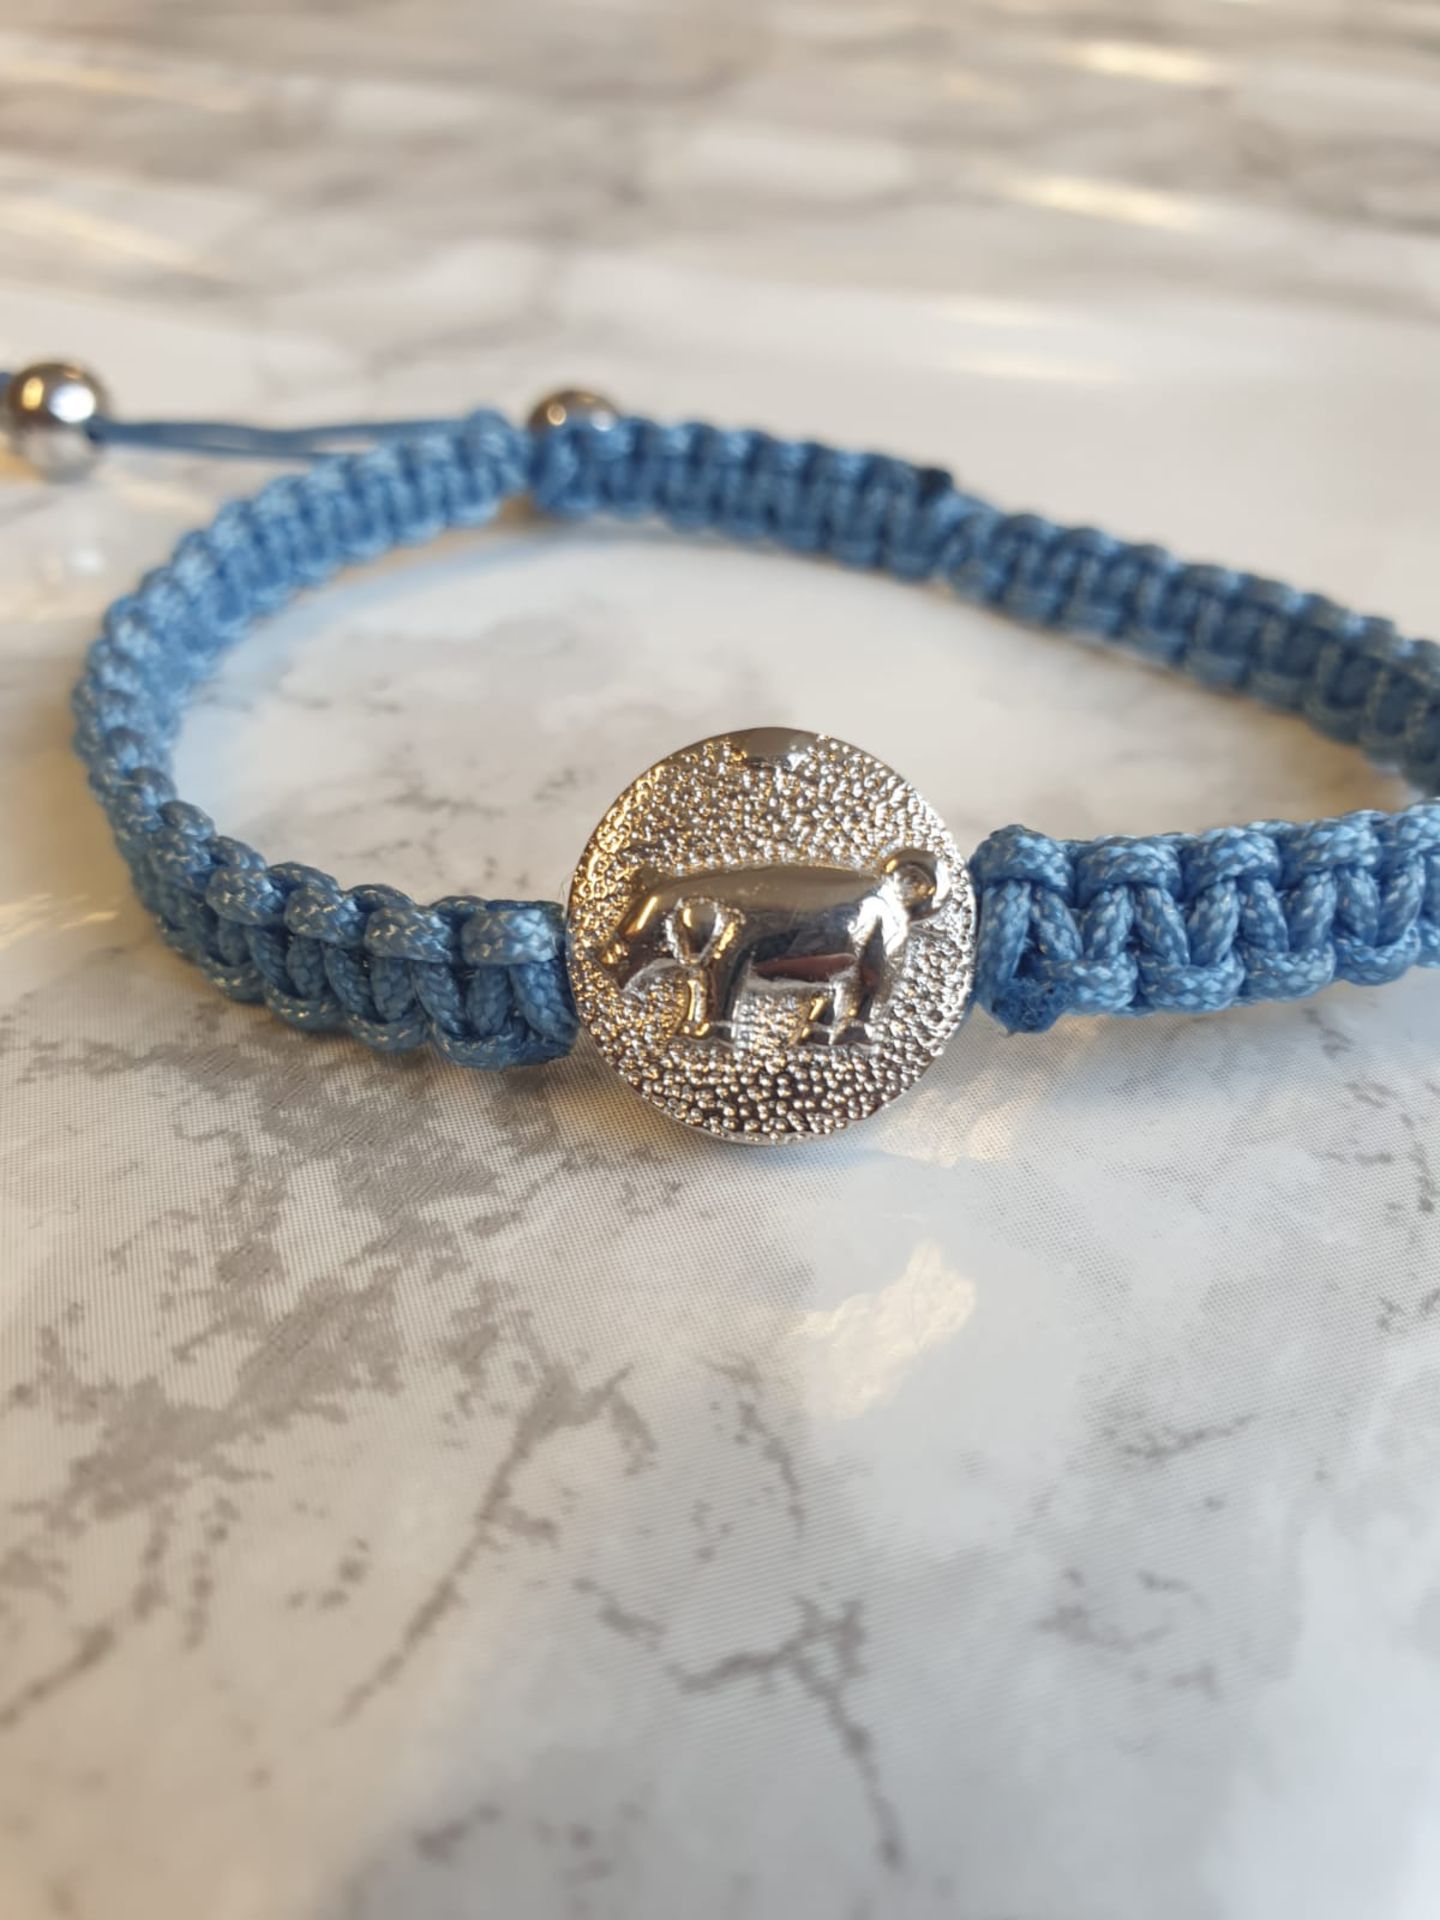 18 x Pig Blue (Silver Bead Ends) Chinese Zodiac Year Adjustable Beaded Bracelet - Image 2 of 5